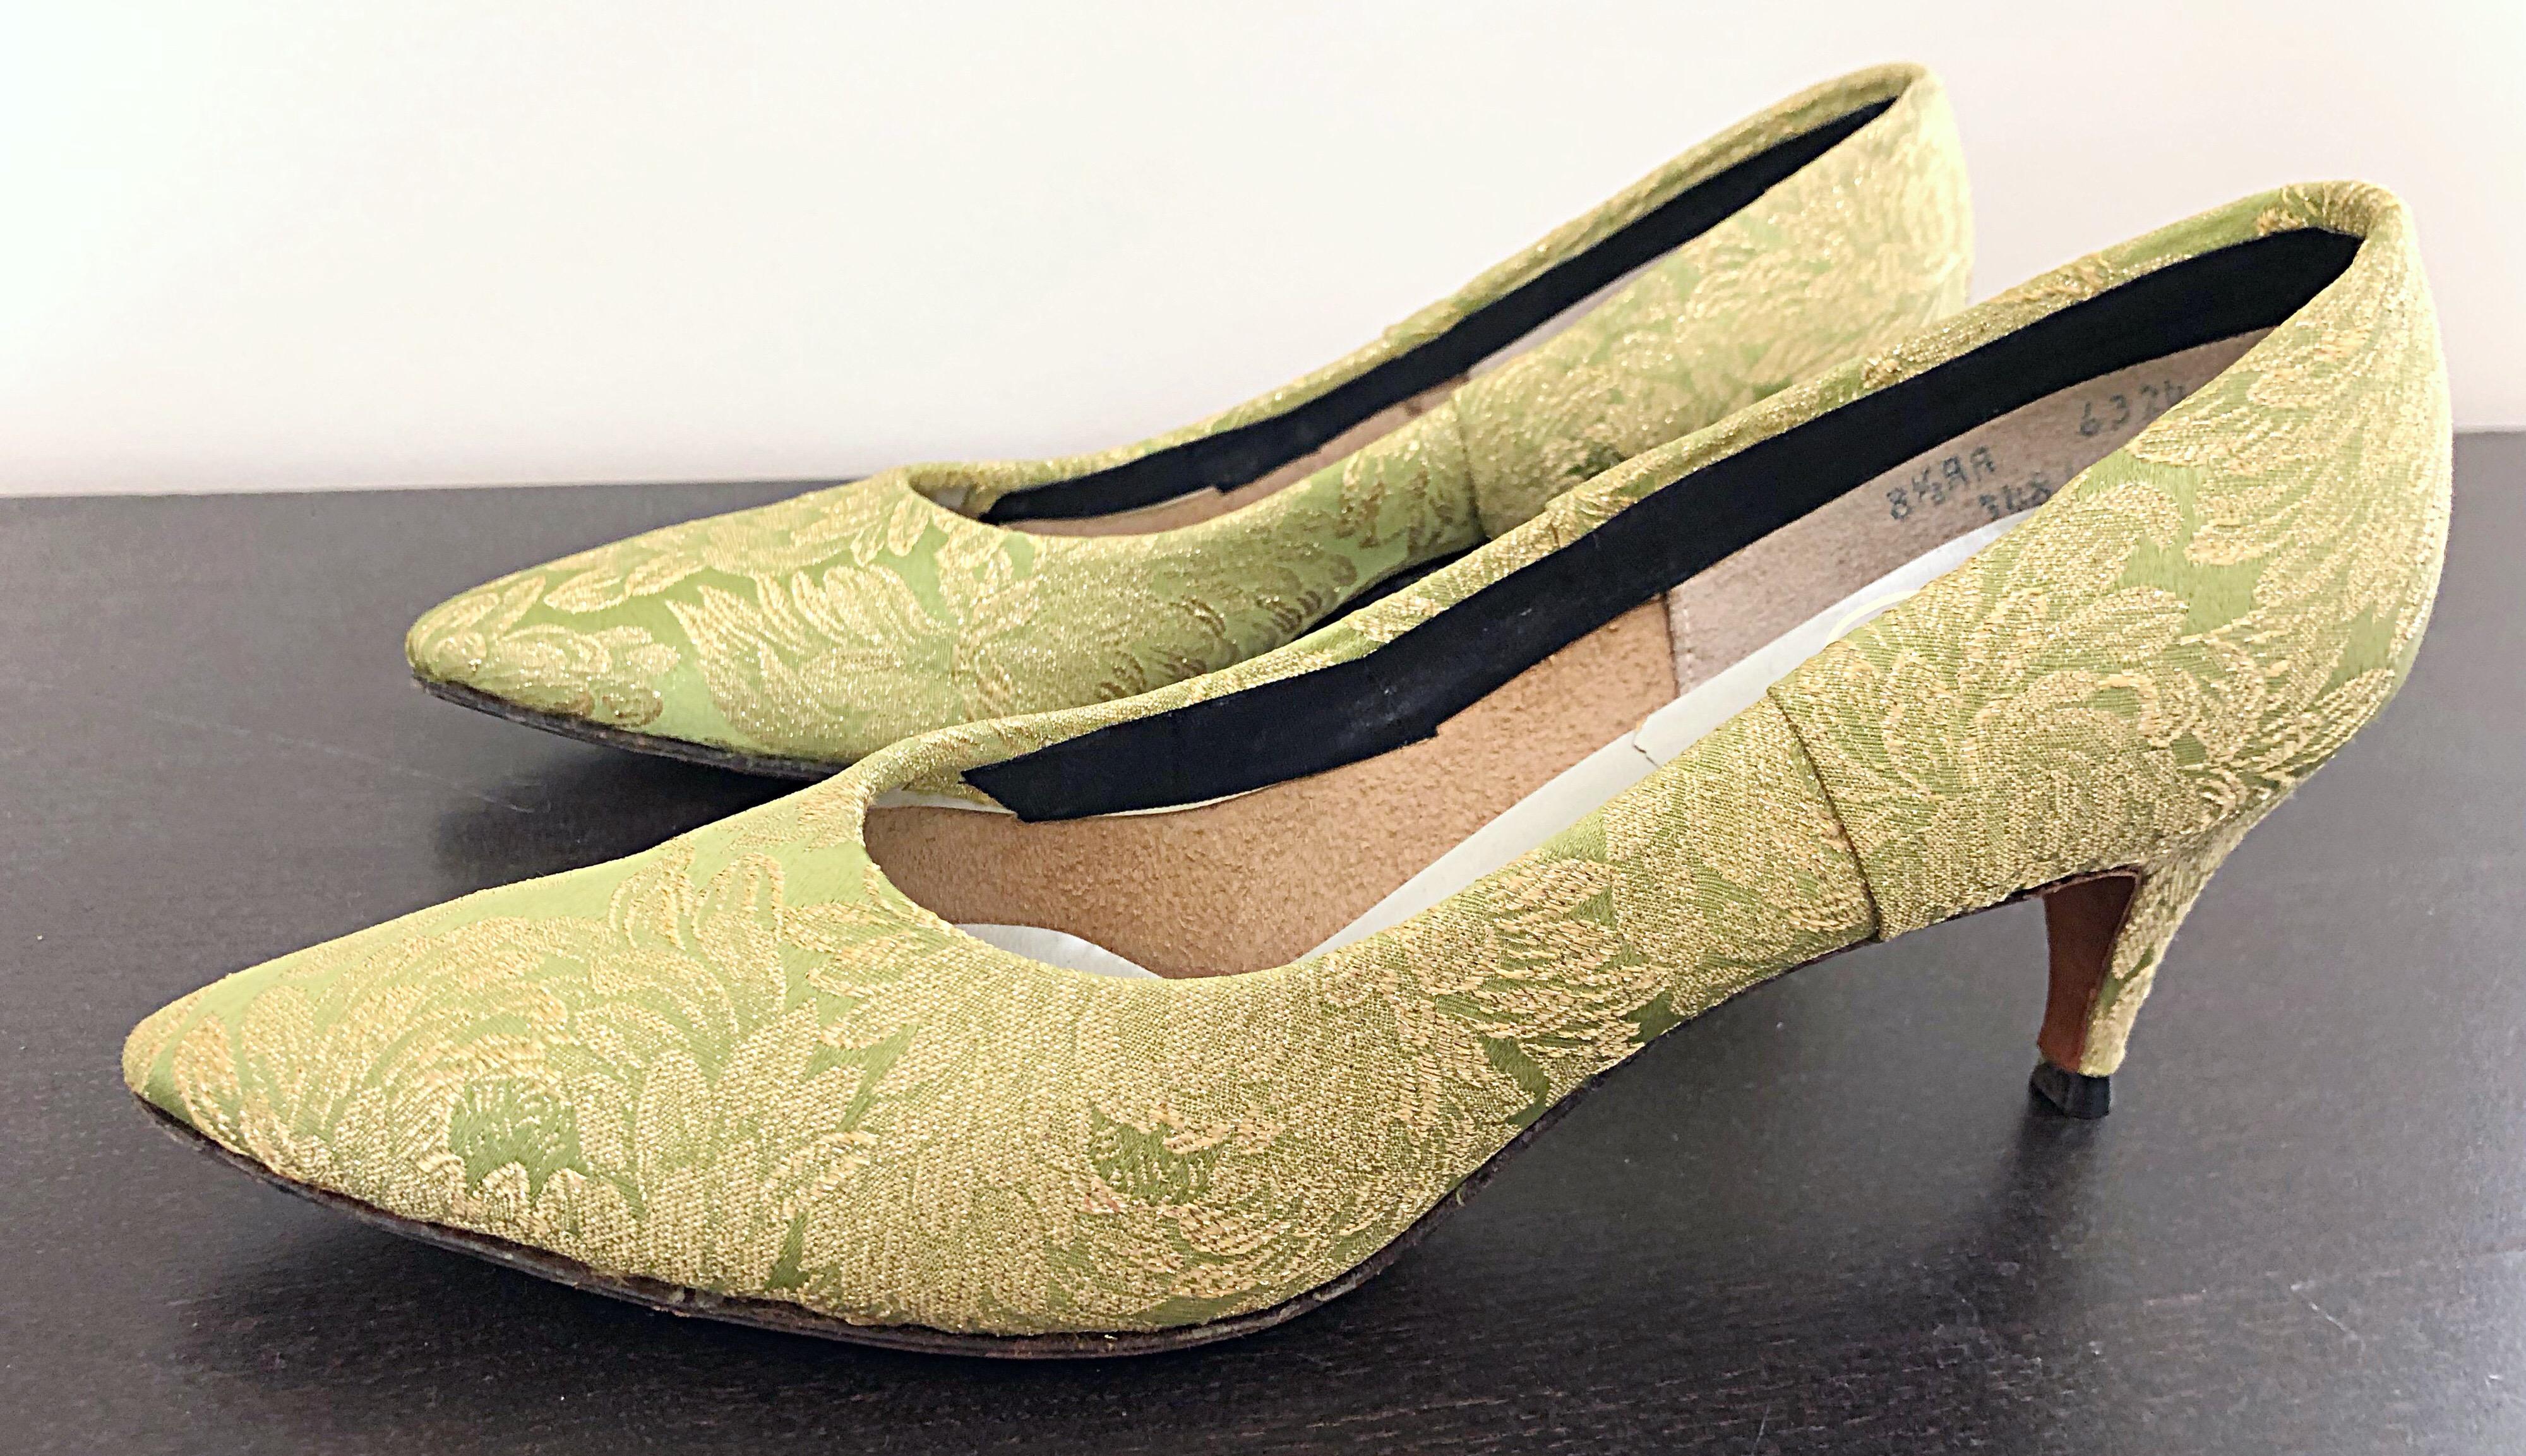 Gorgeous 1950s vintage GAYMODE chartreuse green and gold pointed toe high heels! Features a sensible 2.5 inch heels that is great for the entire day / night. Can easily be dressed up or down. Great with jeans, a dress, skirt or gown. In great